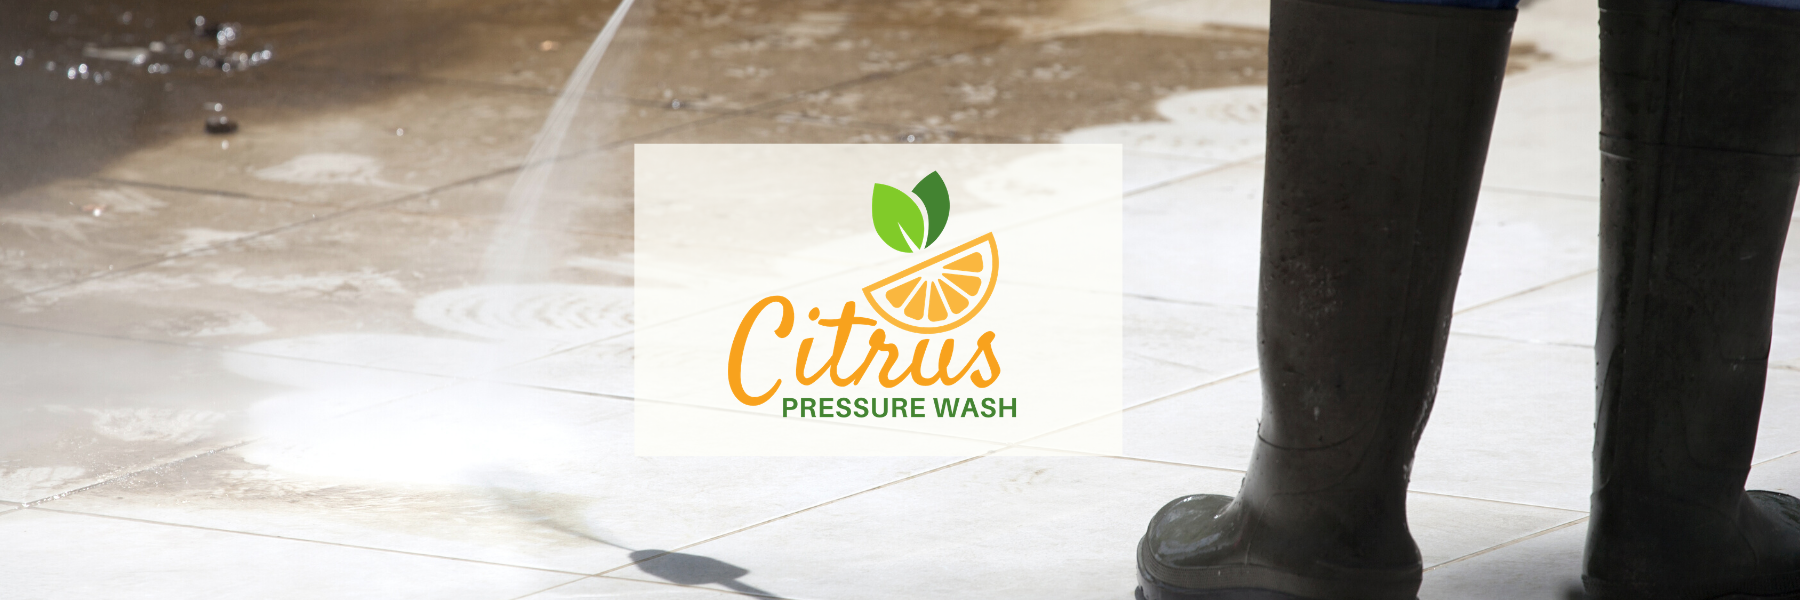 Top Rated Pressure Washing in Inverness Florida – Citrus Pressure Wash